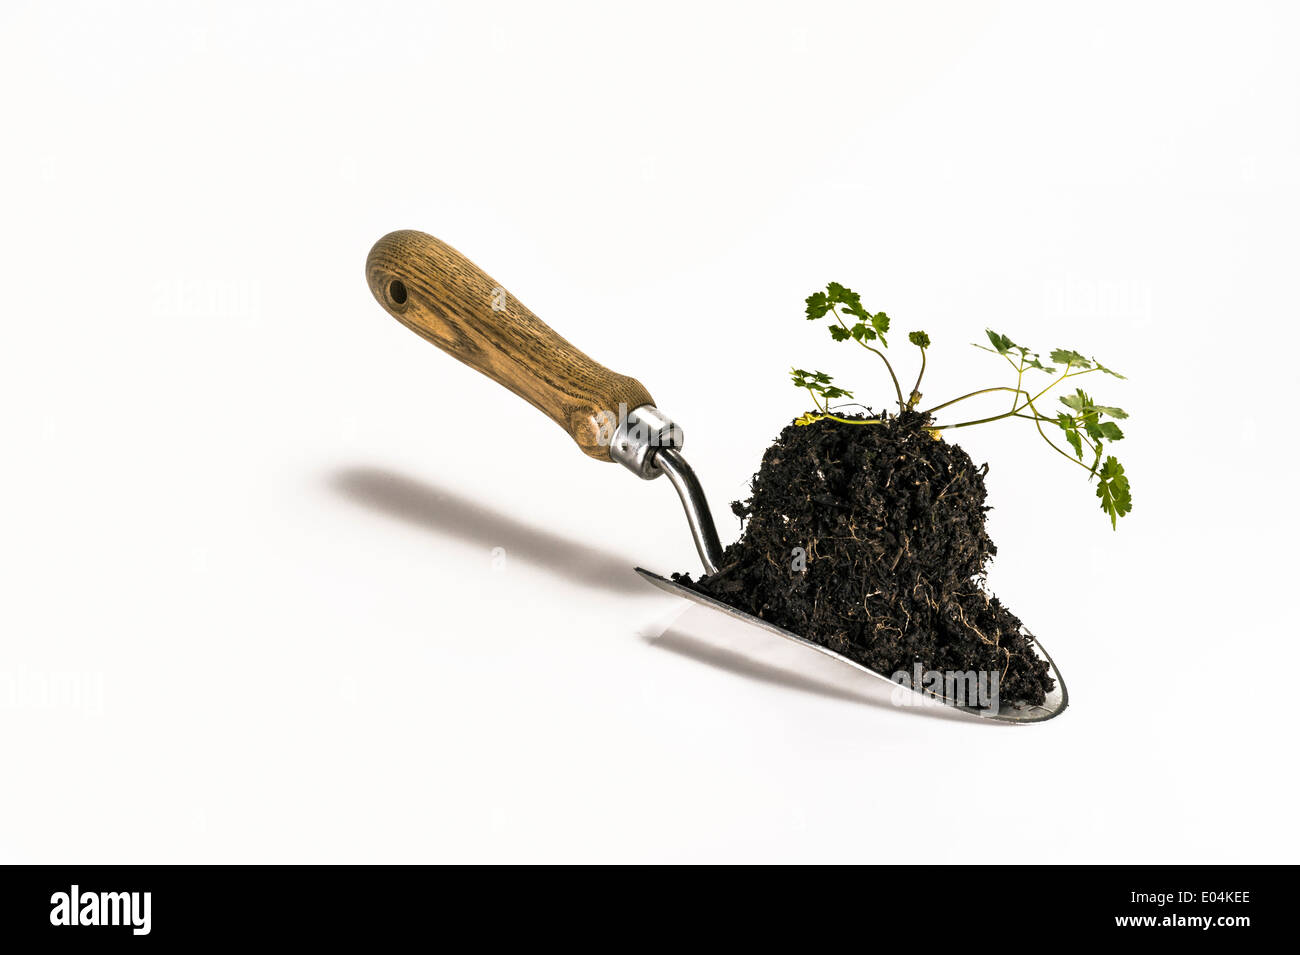 Young plant on a trowel for transplanting. Stock Photo